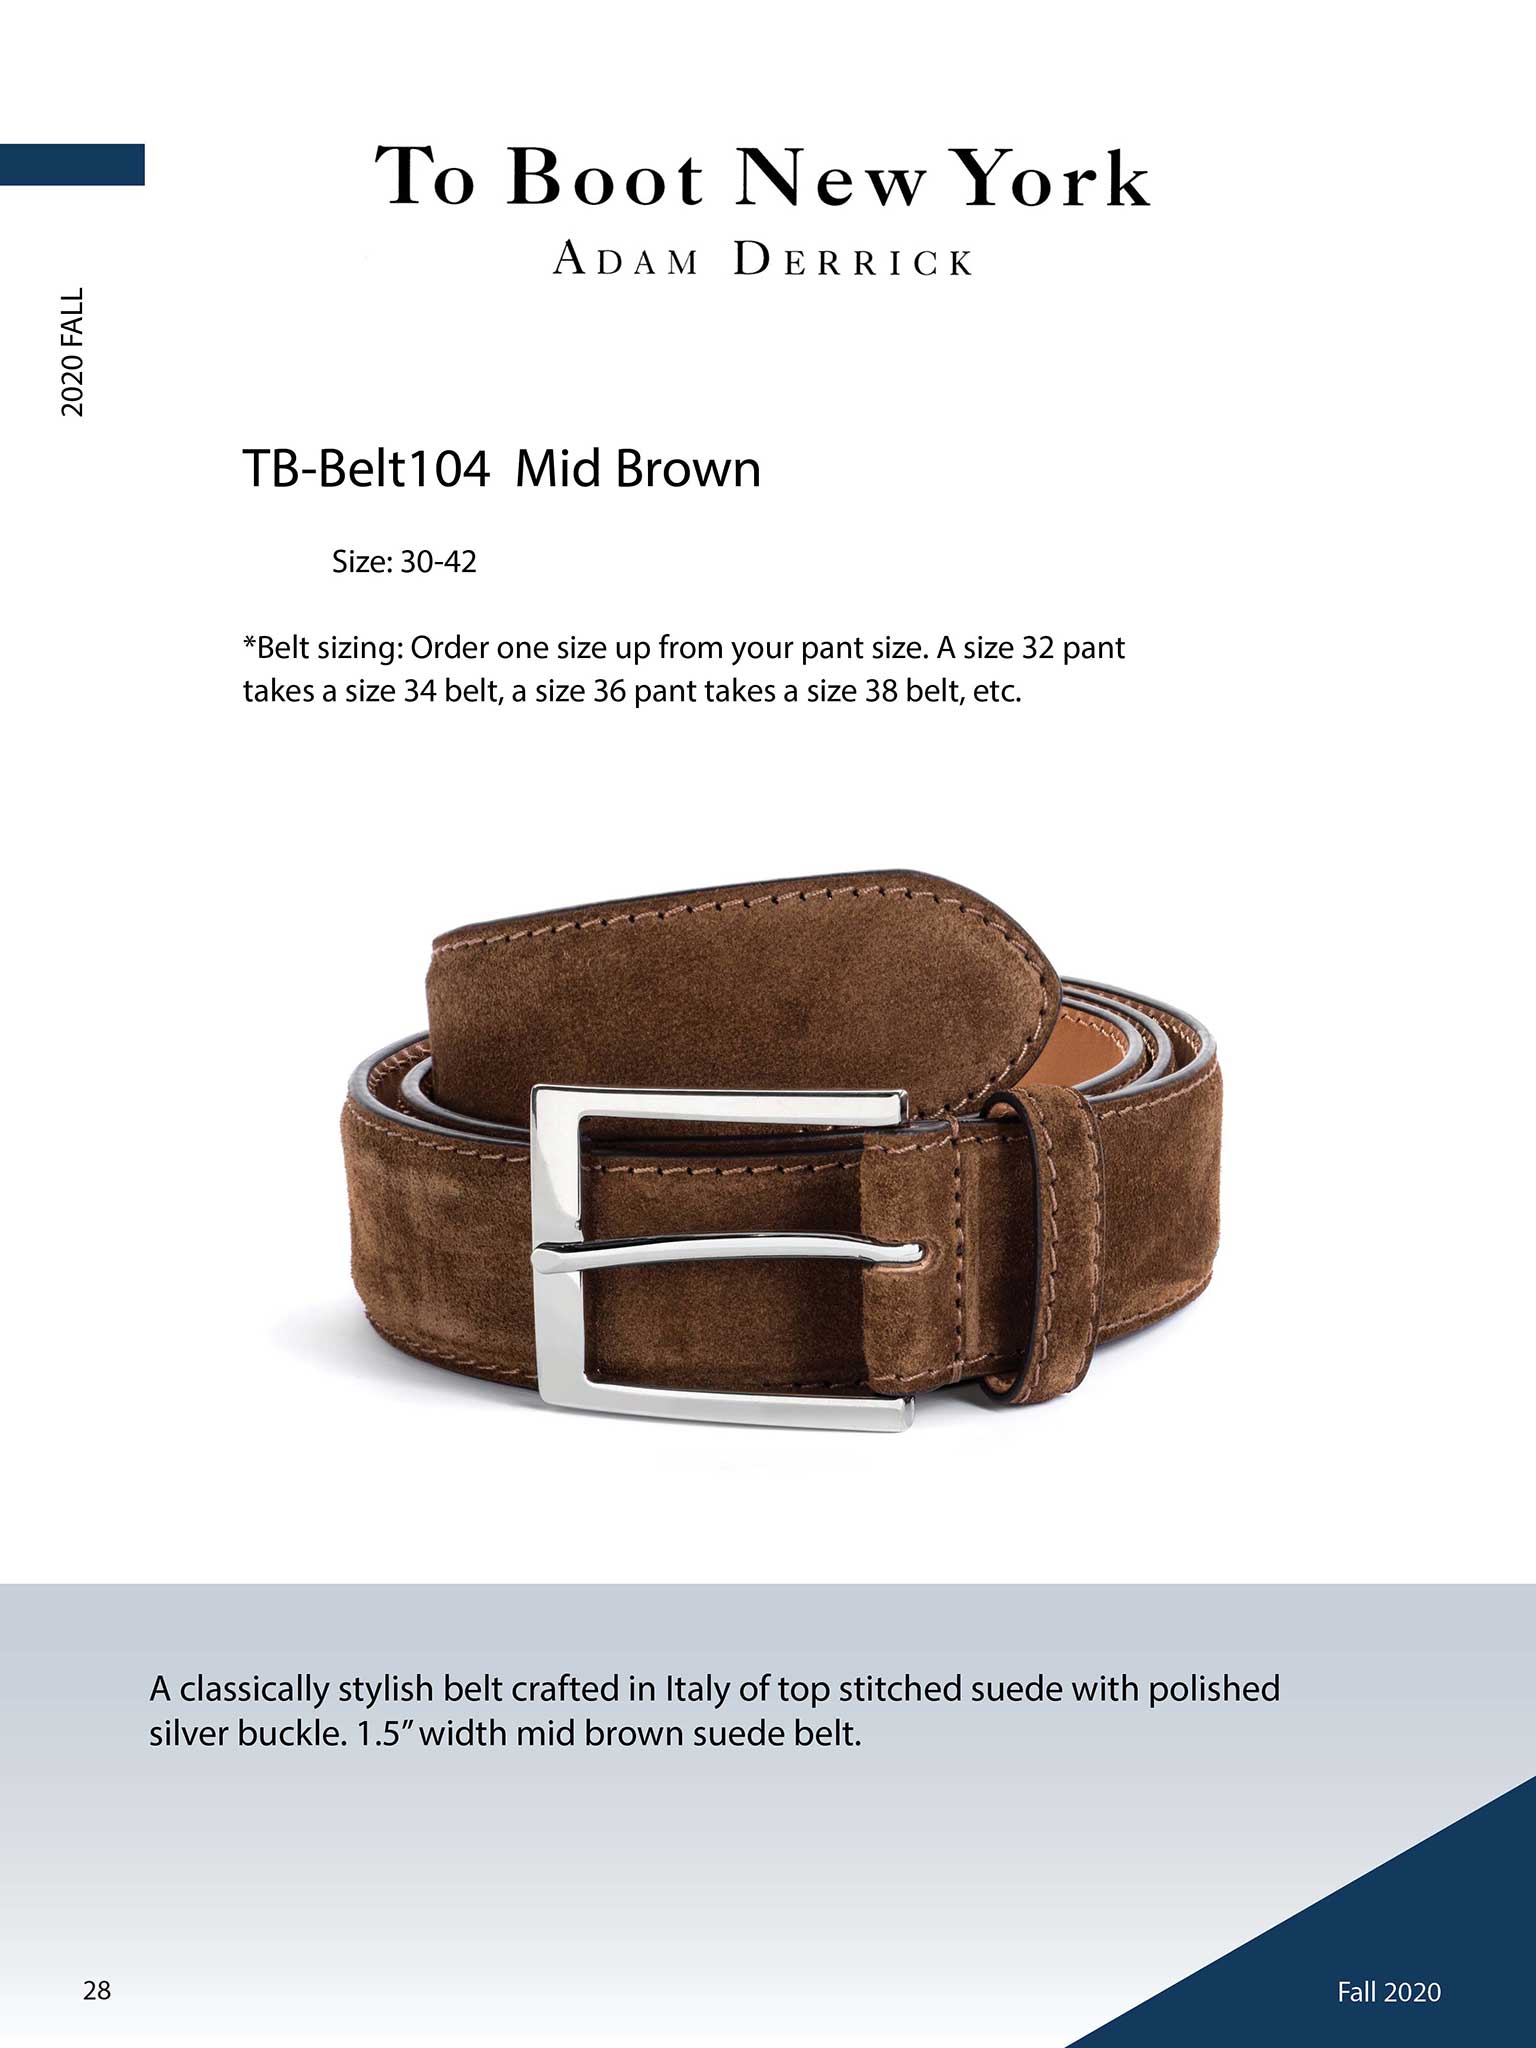 To Boot New York                                                                                                                                                                                                                                          , Mid Brown Suede Belt by To Boot New York